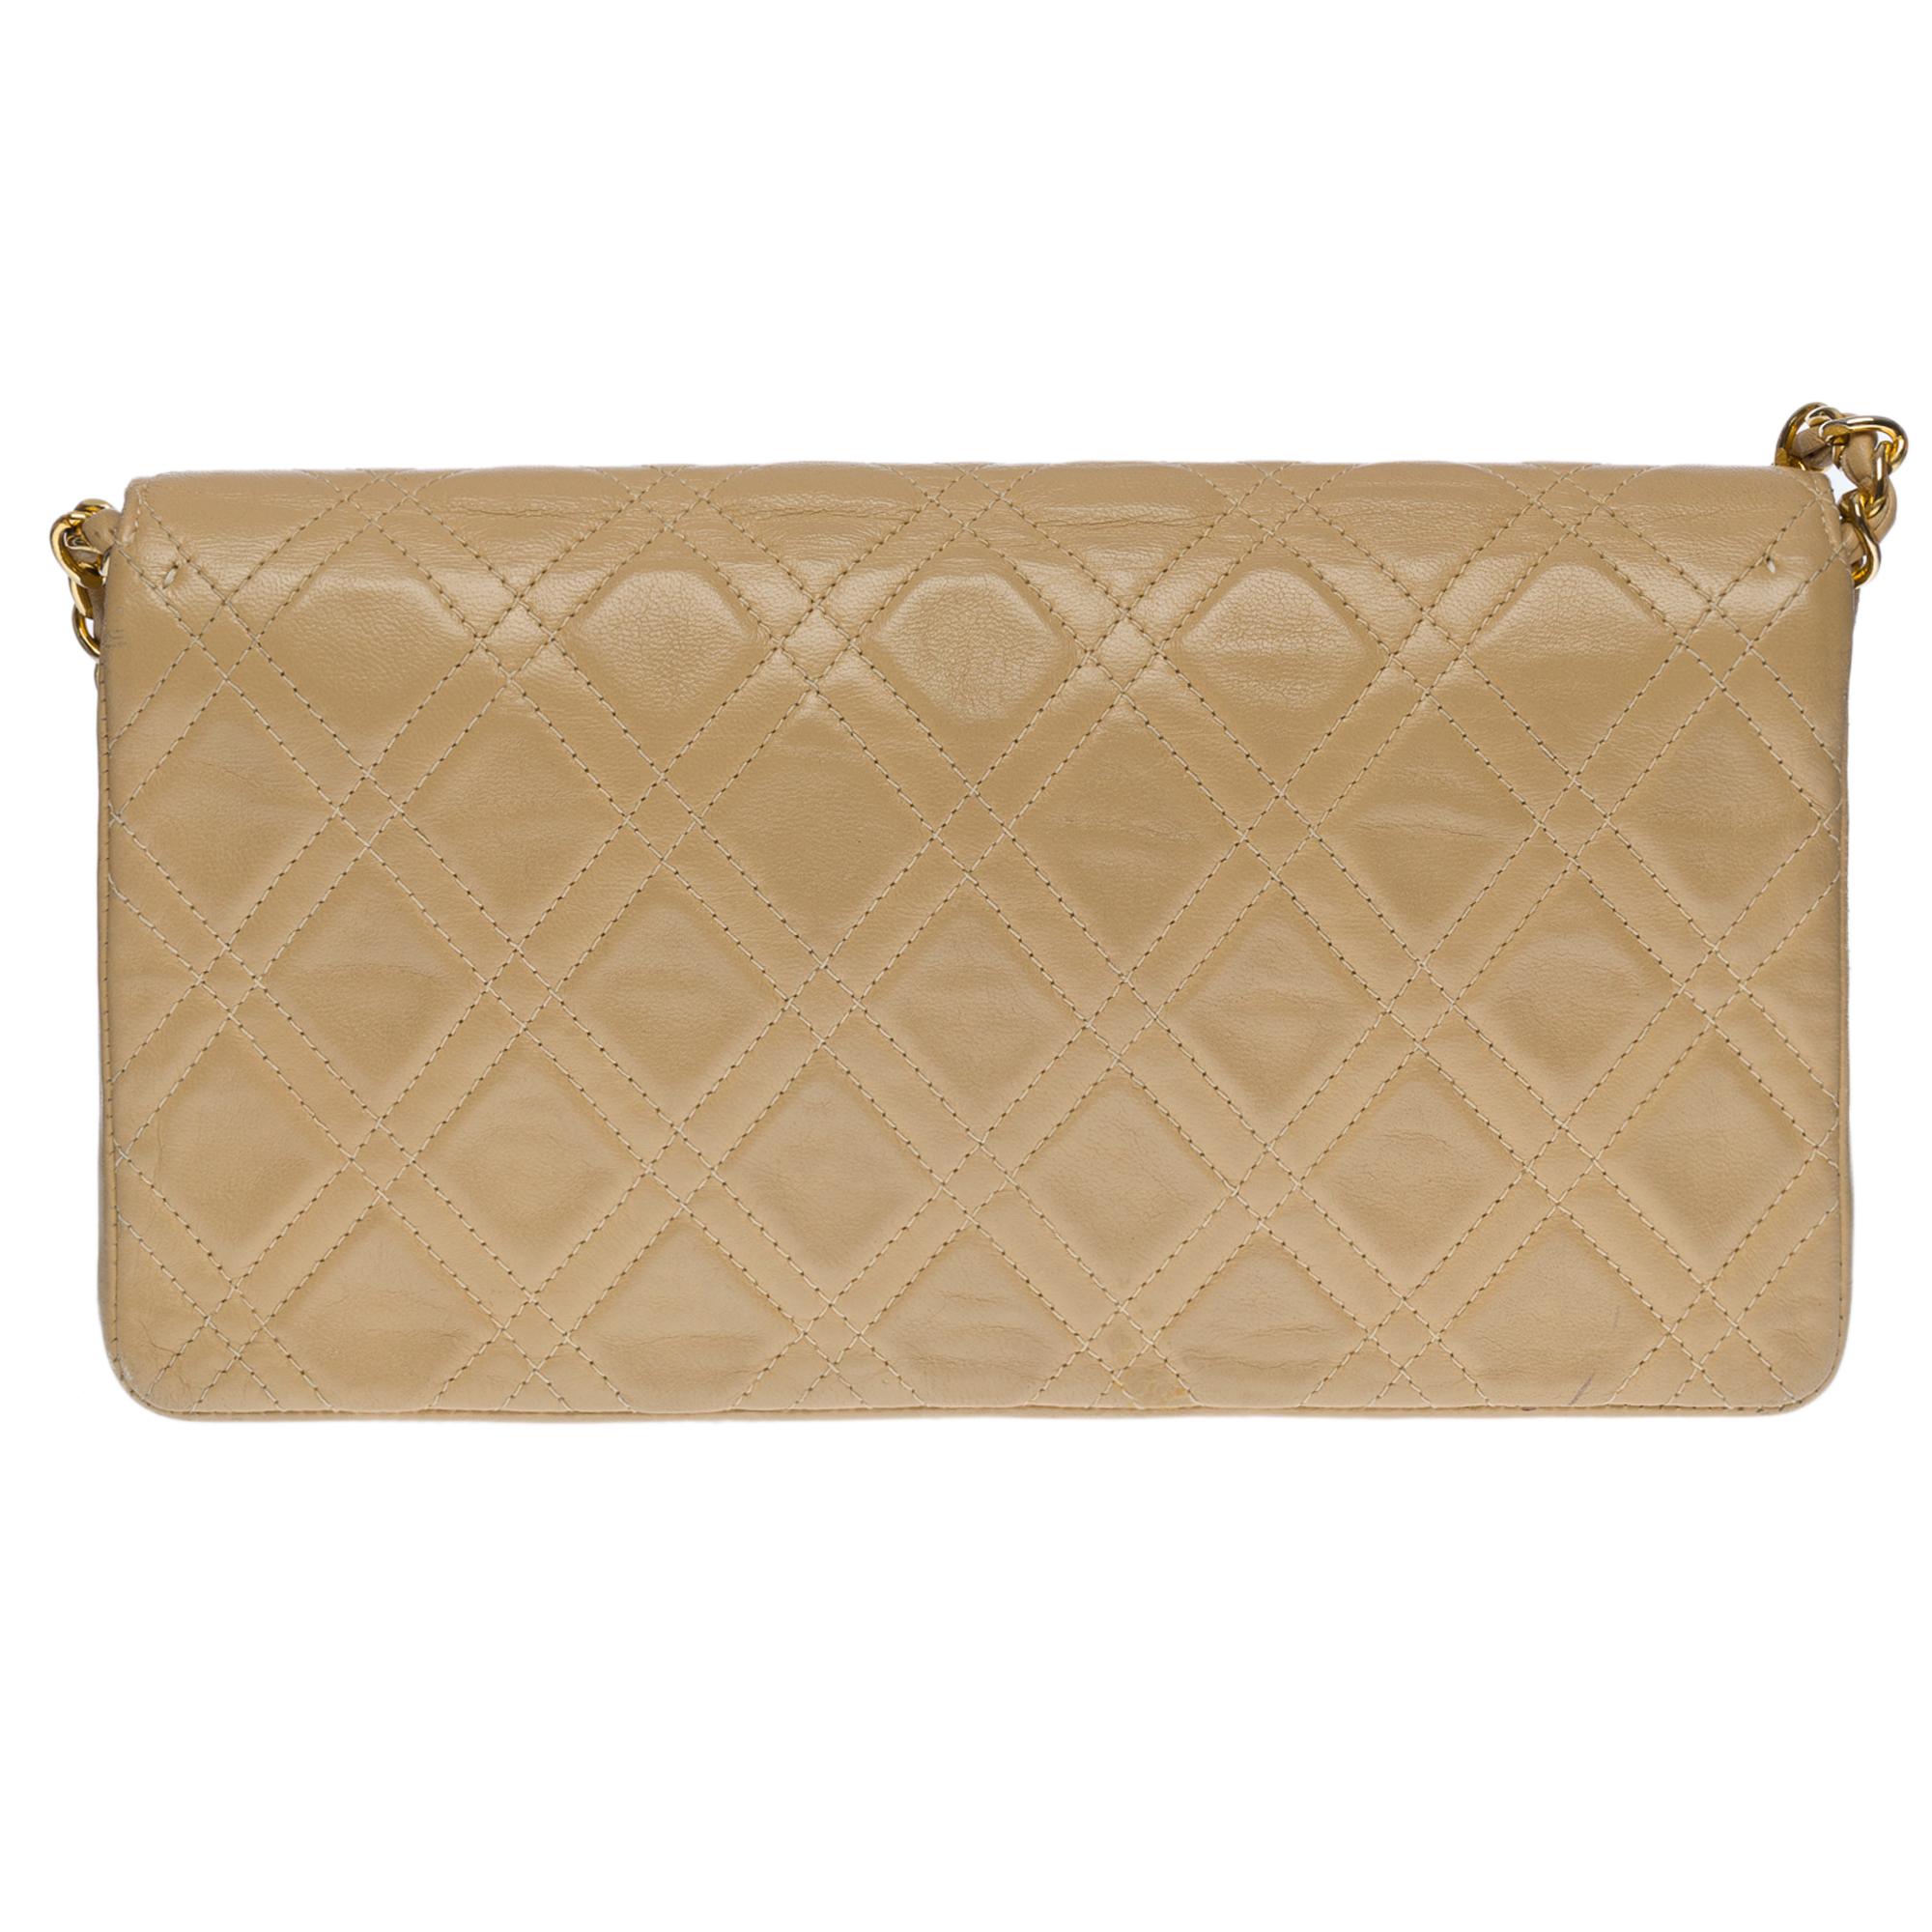 Sublime limited edition Chanel Full flap shoulder bag in beige quilted lambskin leather, white stitching, gold-tone metal hardware, a gold-tone metal chain handle allowing shoulder and shoulder strap
Flap closure with gold CC logo clasp
Front patch